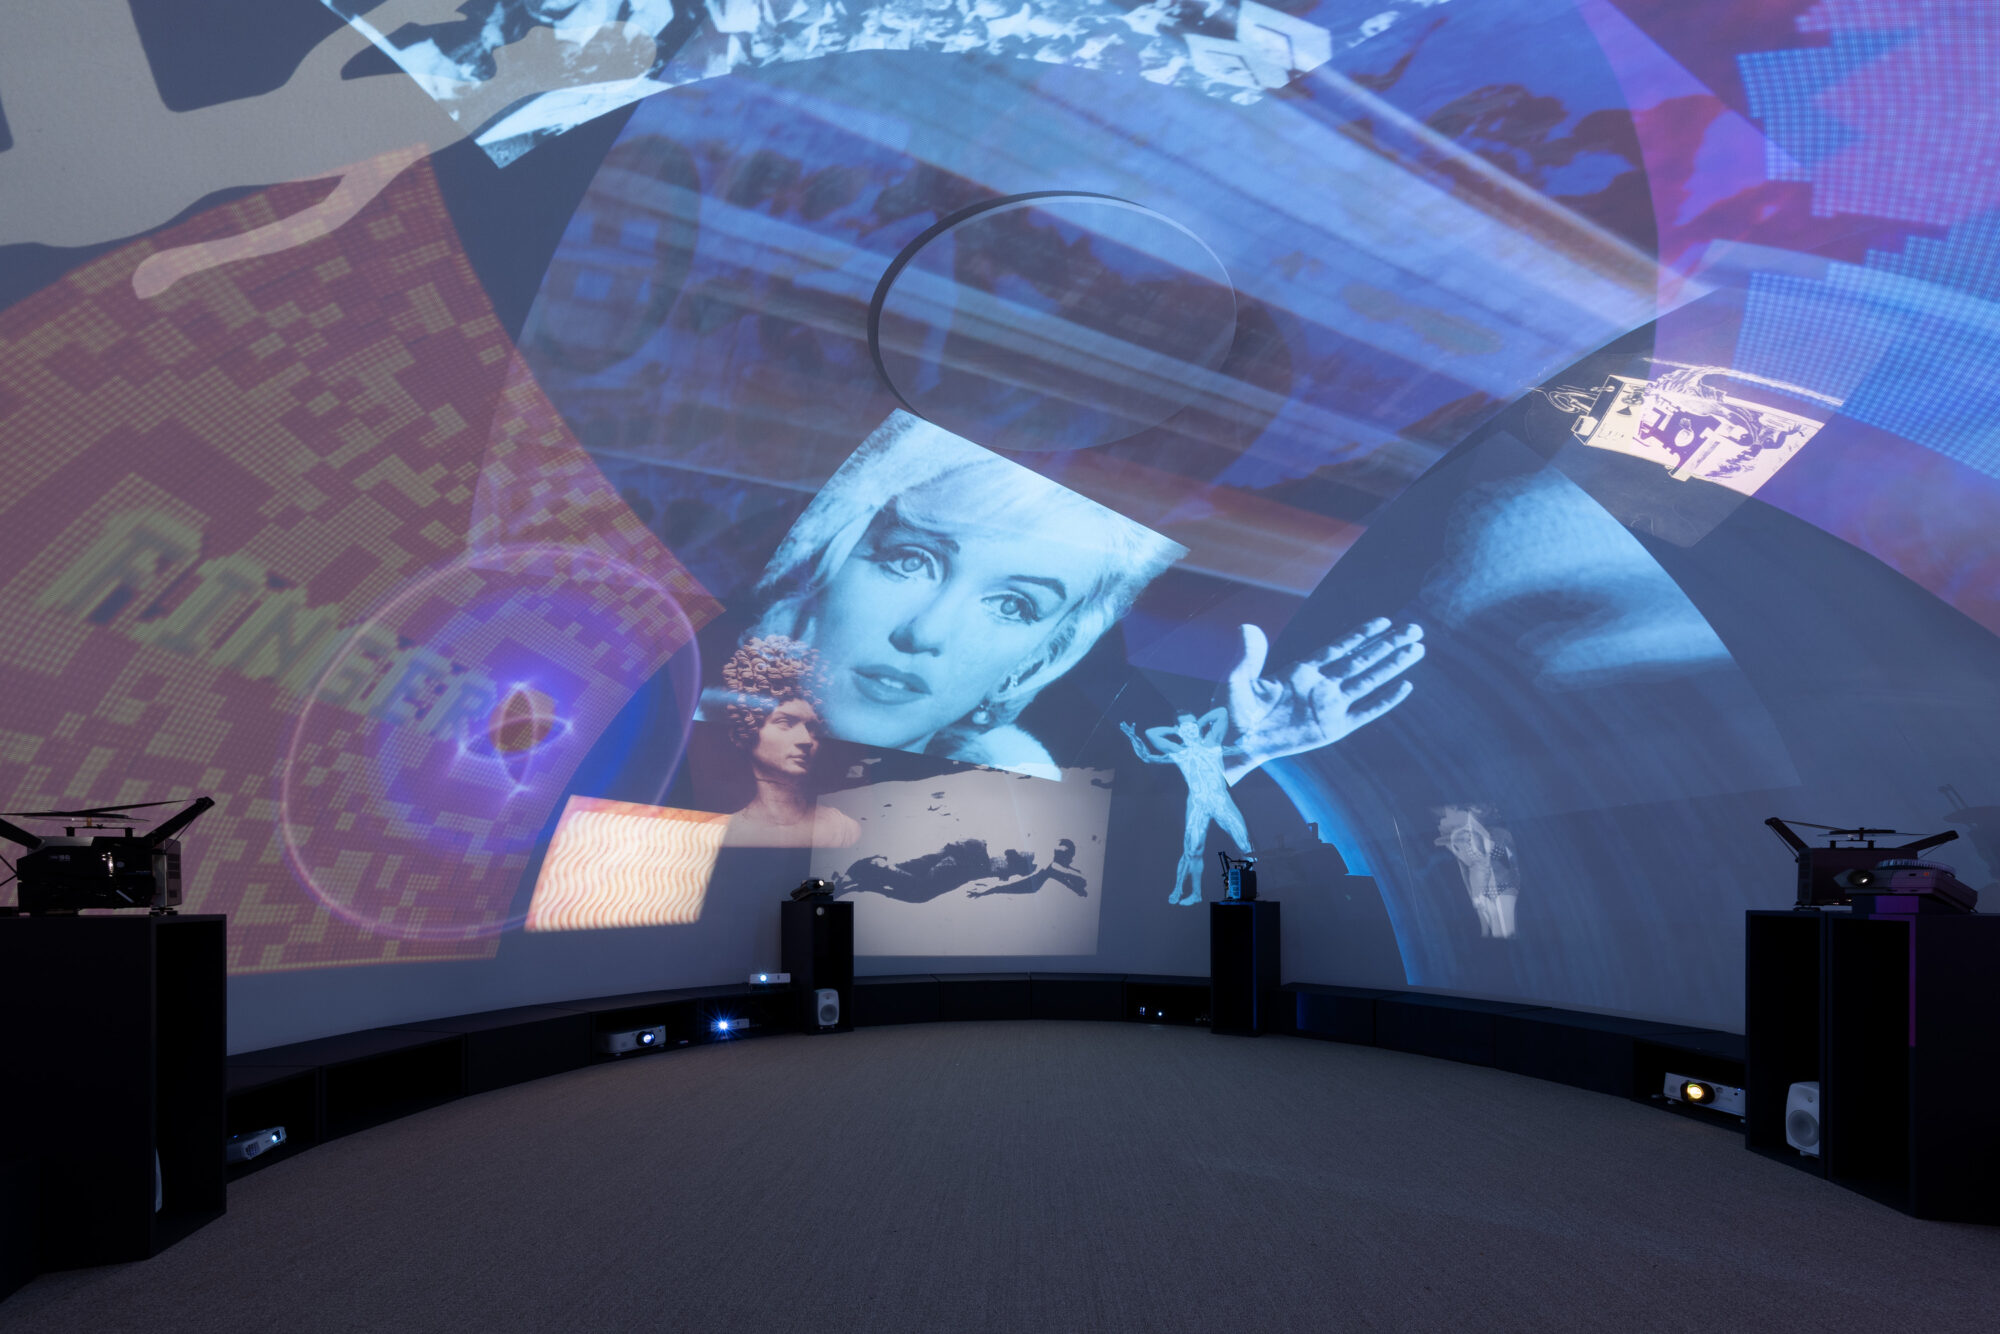 installation shot from inside a dome with various images projected onto the inside ceiling